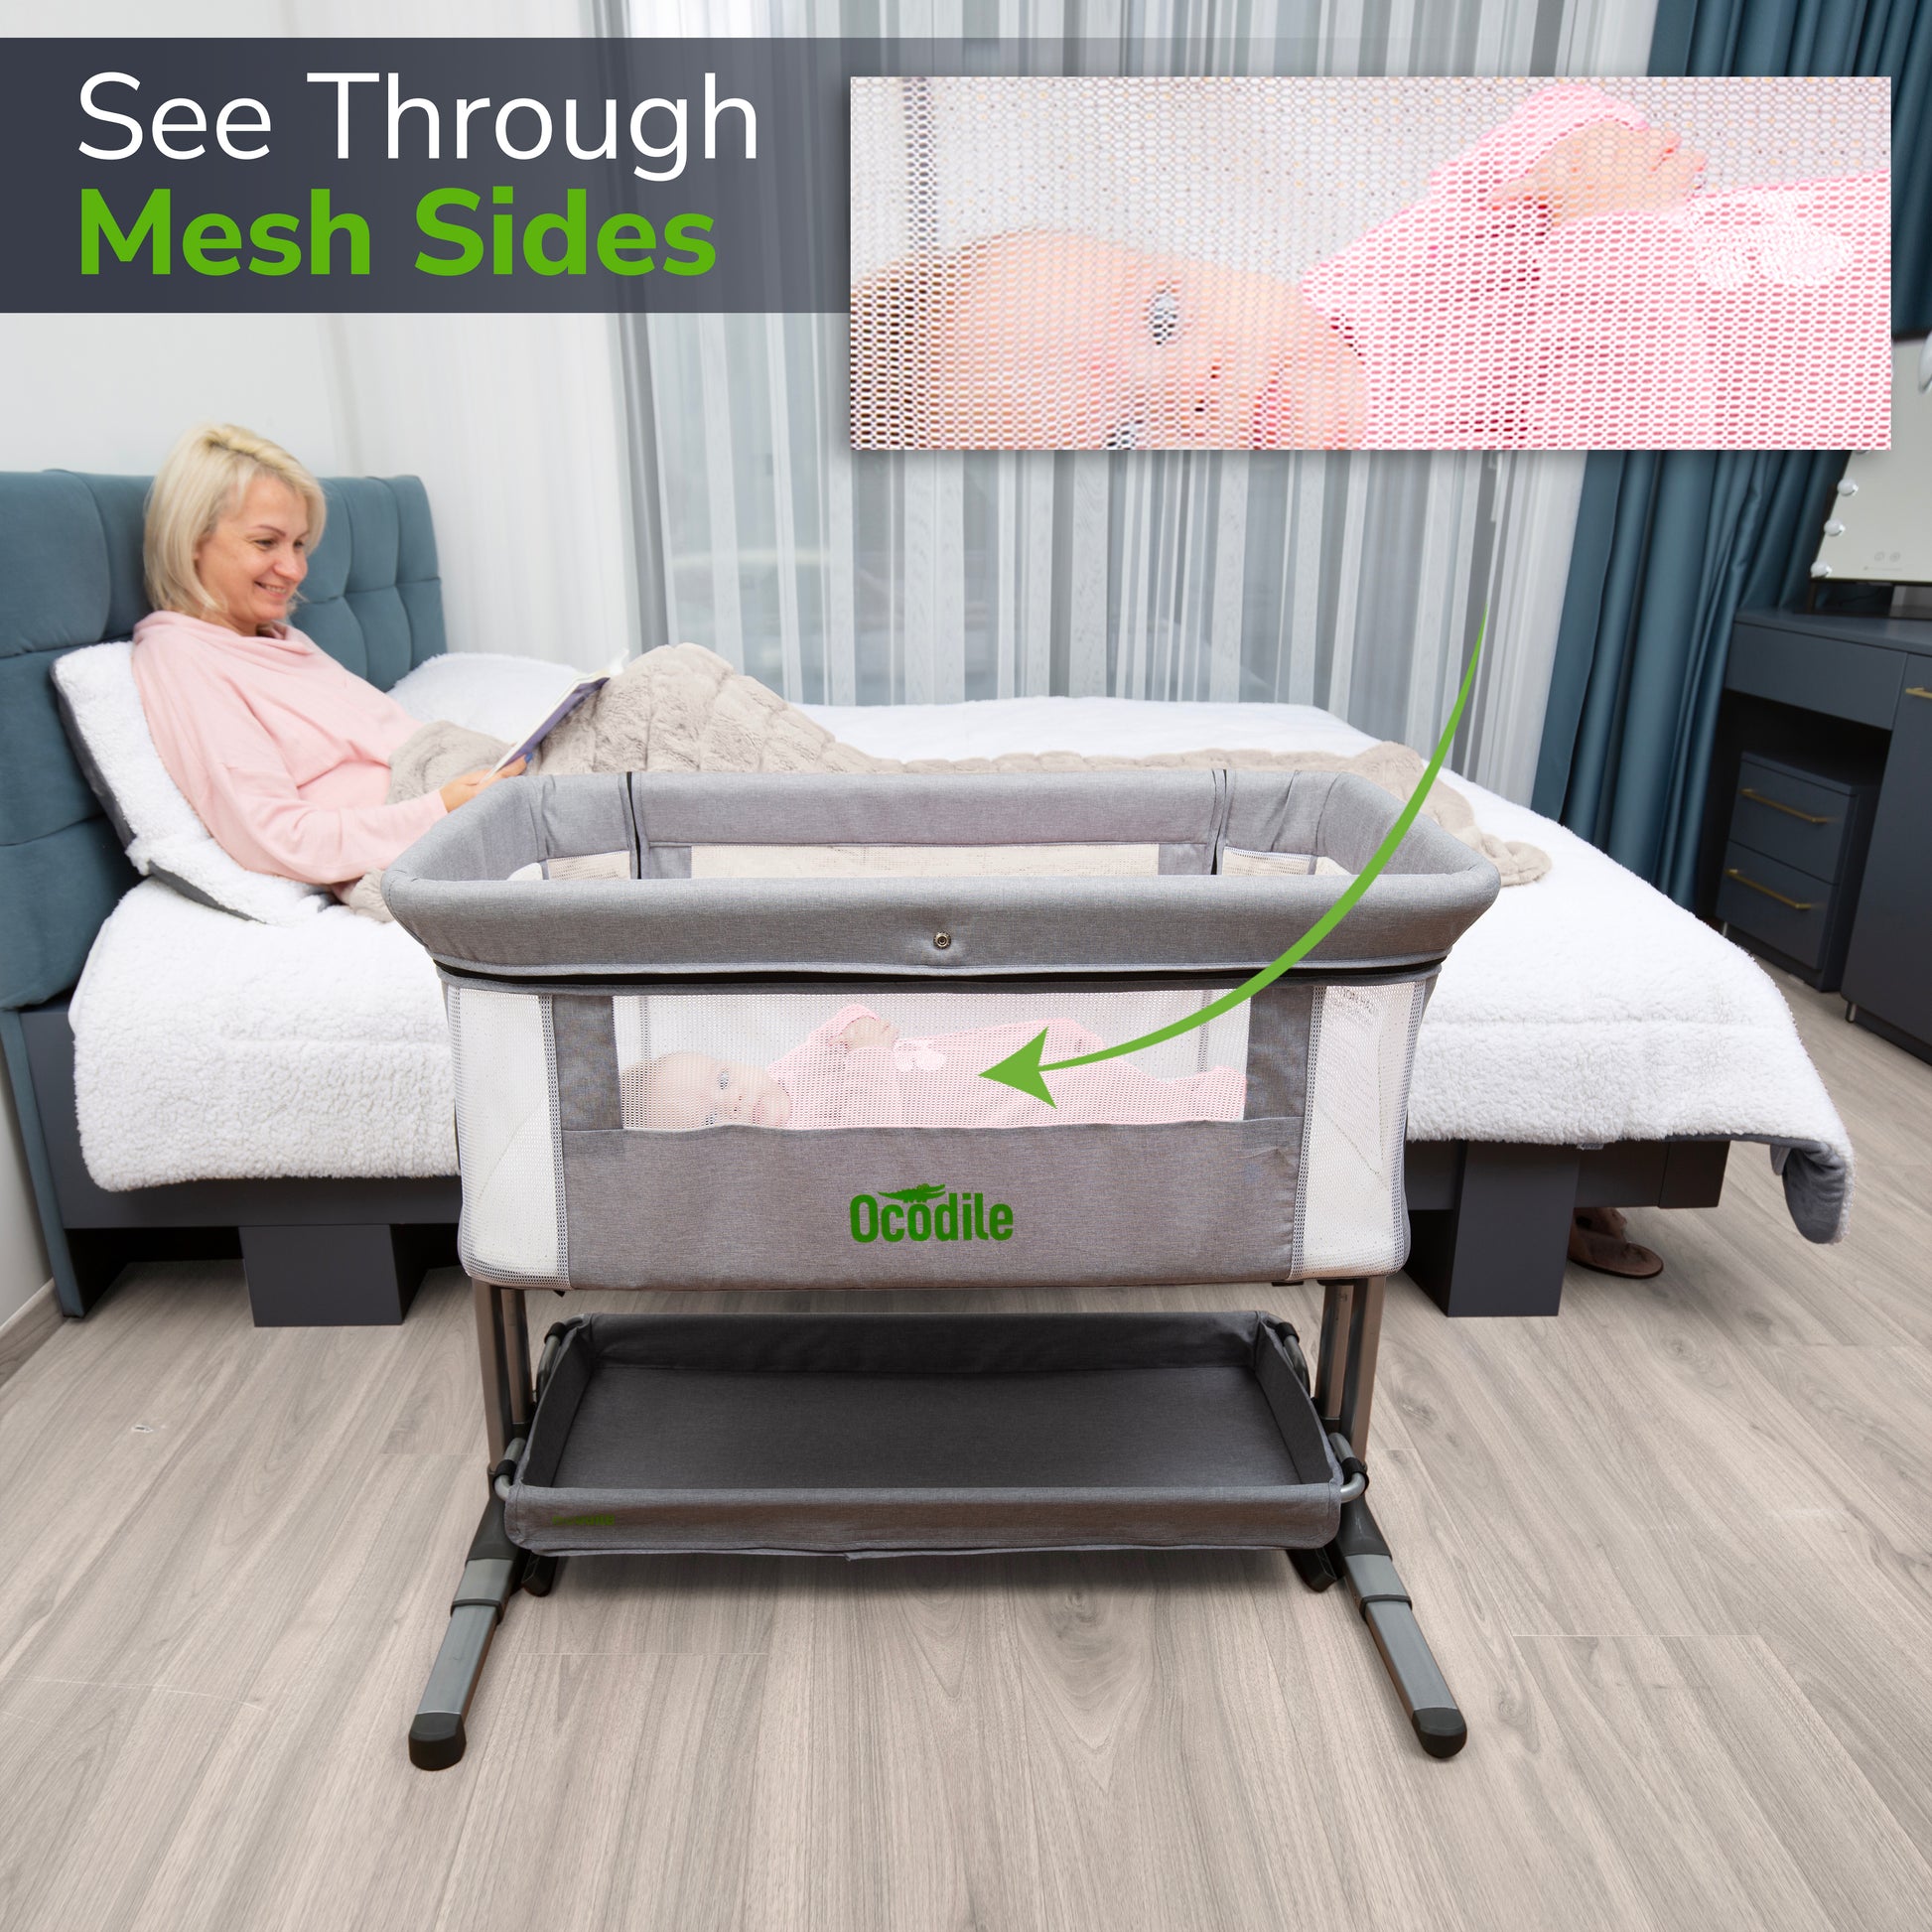 The Cozy Cradle by Your Side:The Comfort of a Bedside Sleeper for Baby, by  Ebni Viljoen, Jan, 2024